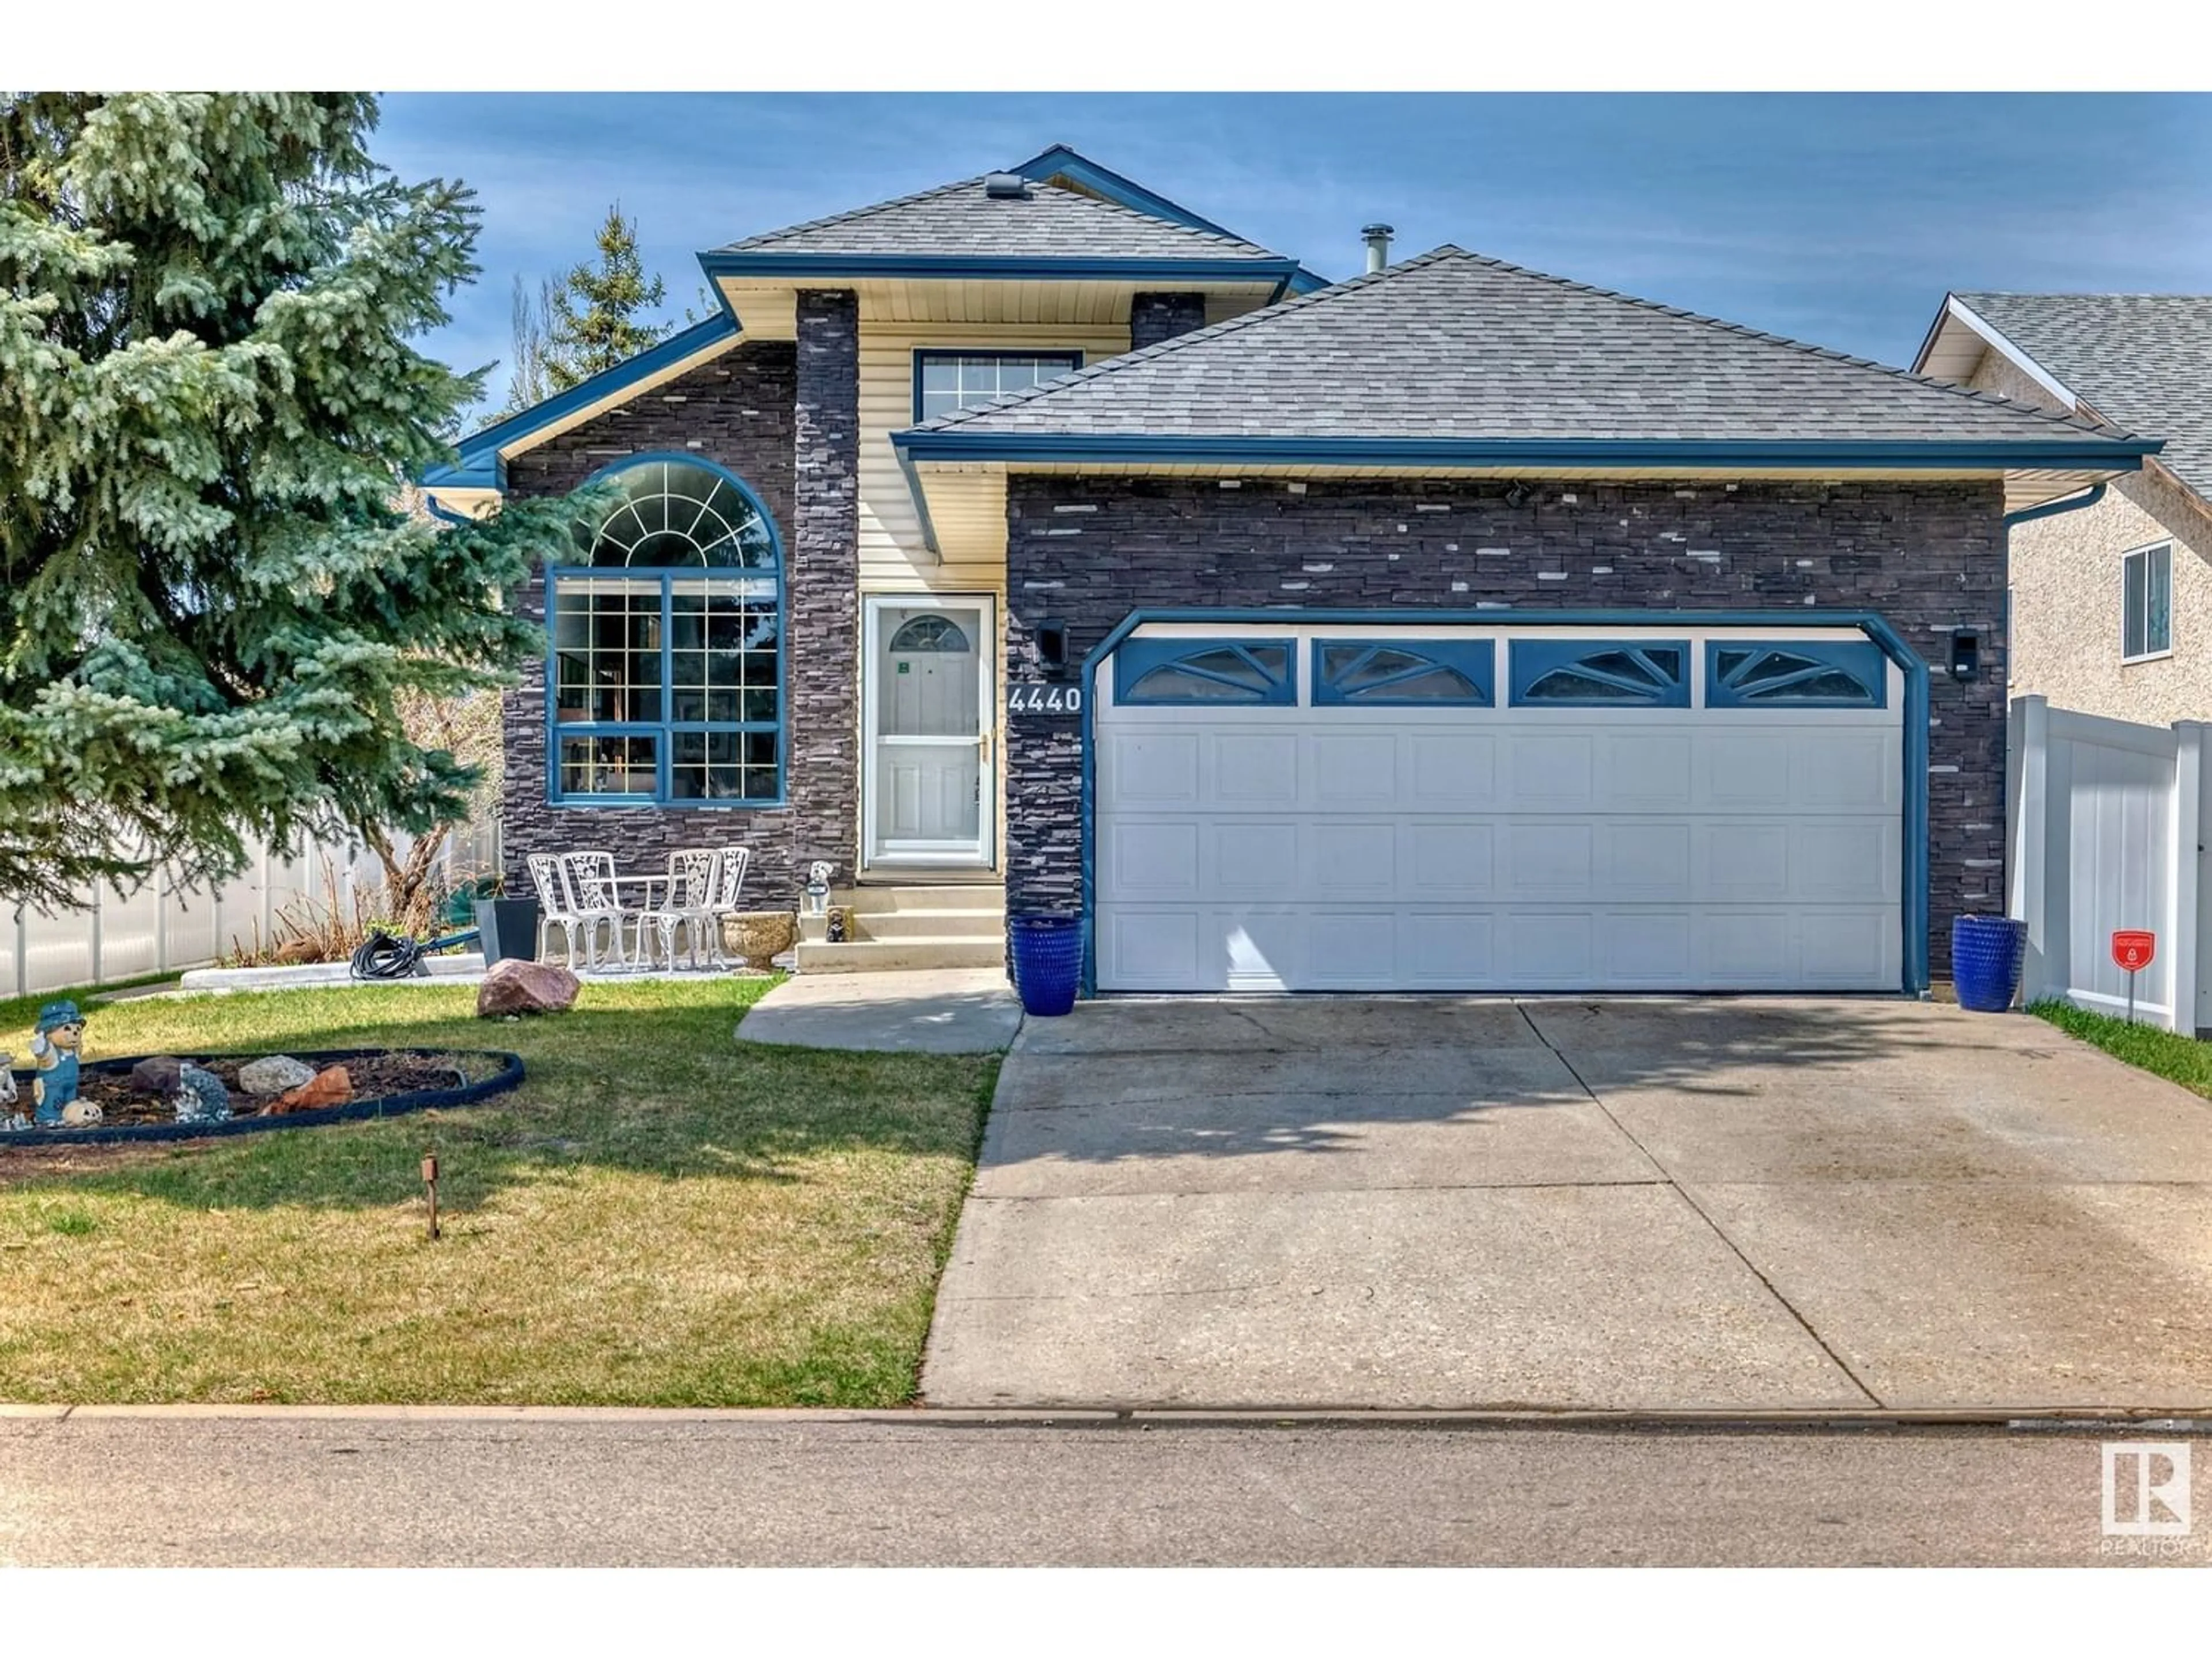 Frontside or backside of a home for 4440 29 ST NW, Edmonton Alberta T6T1G9